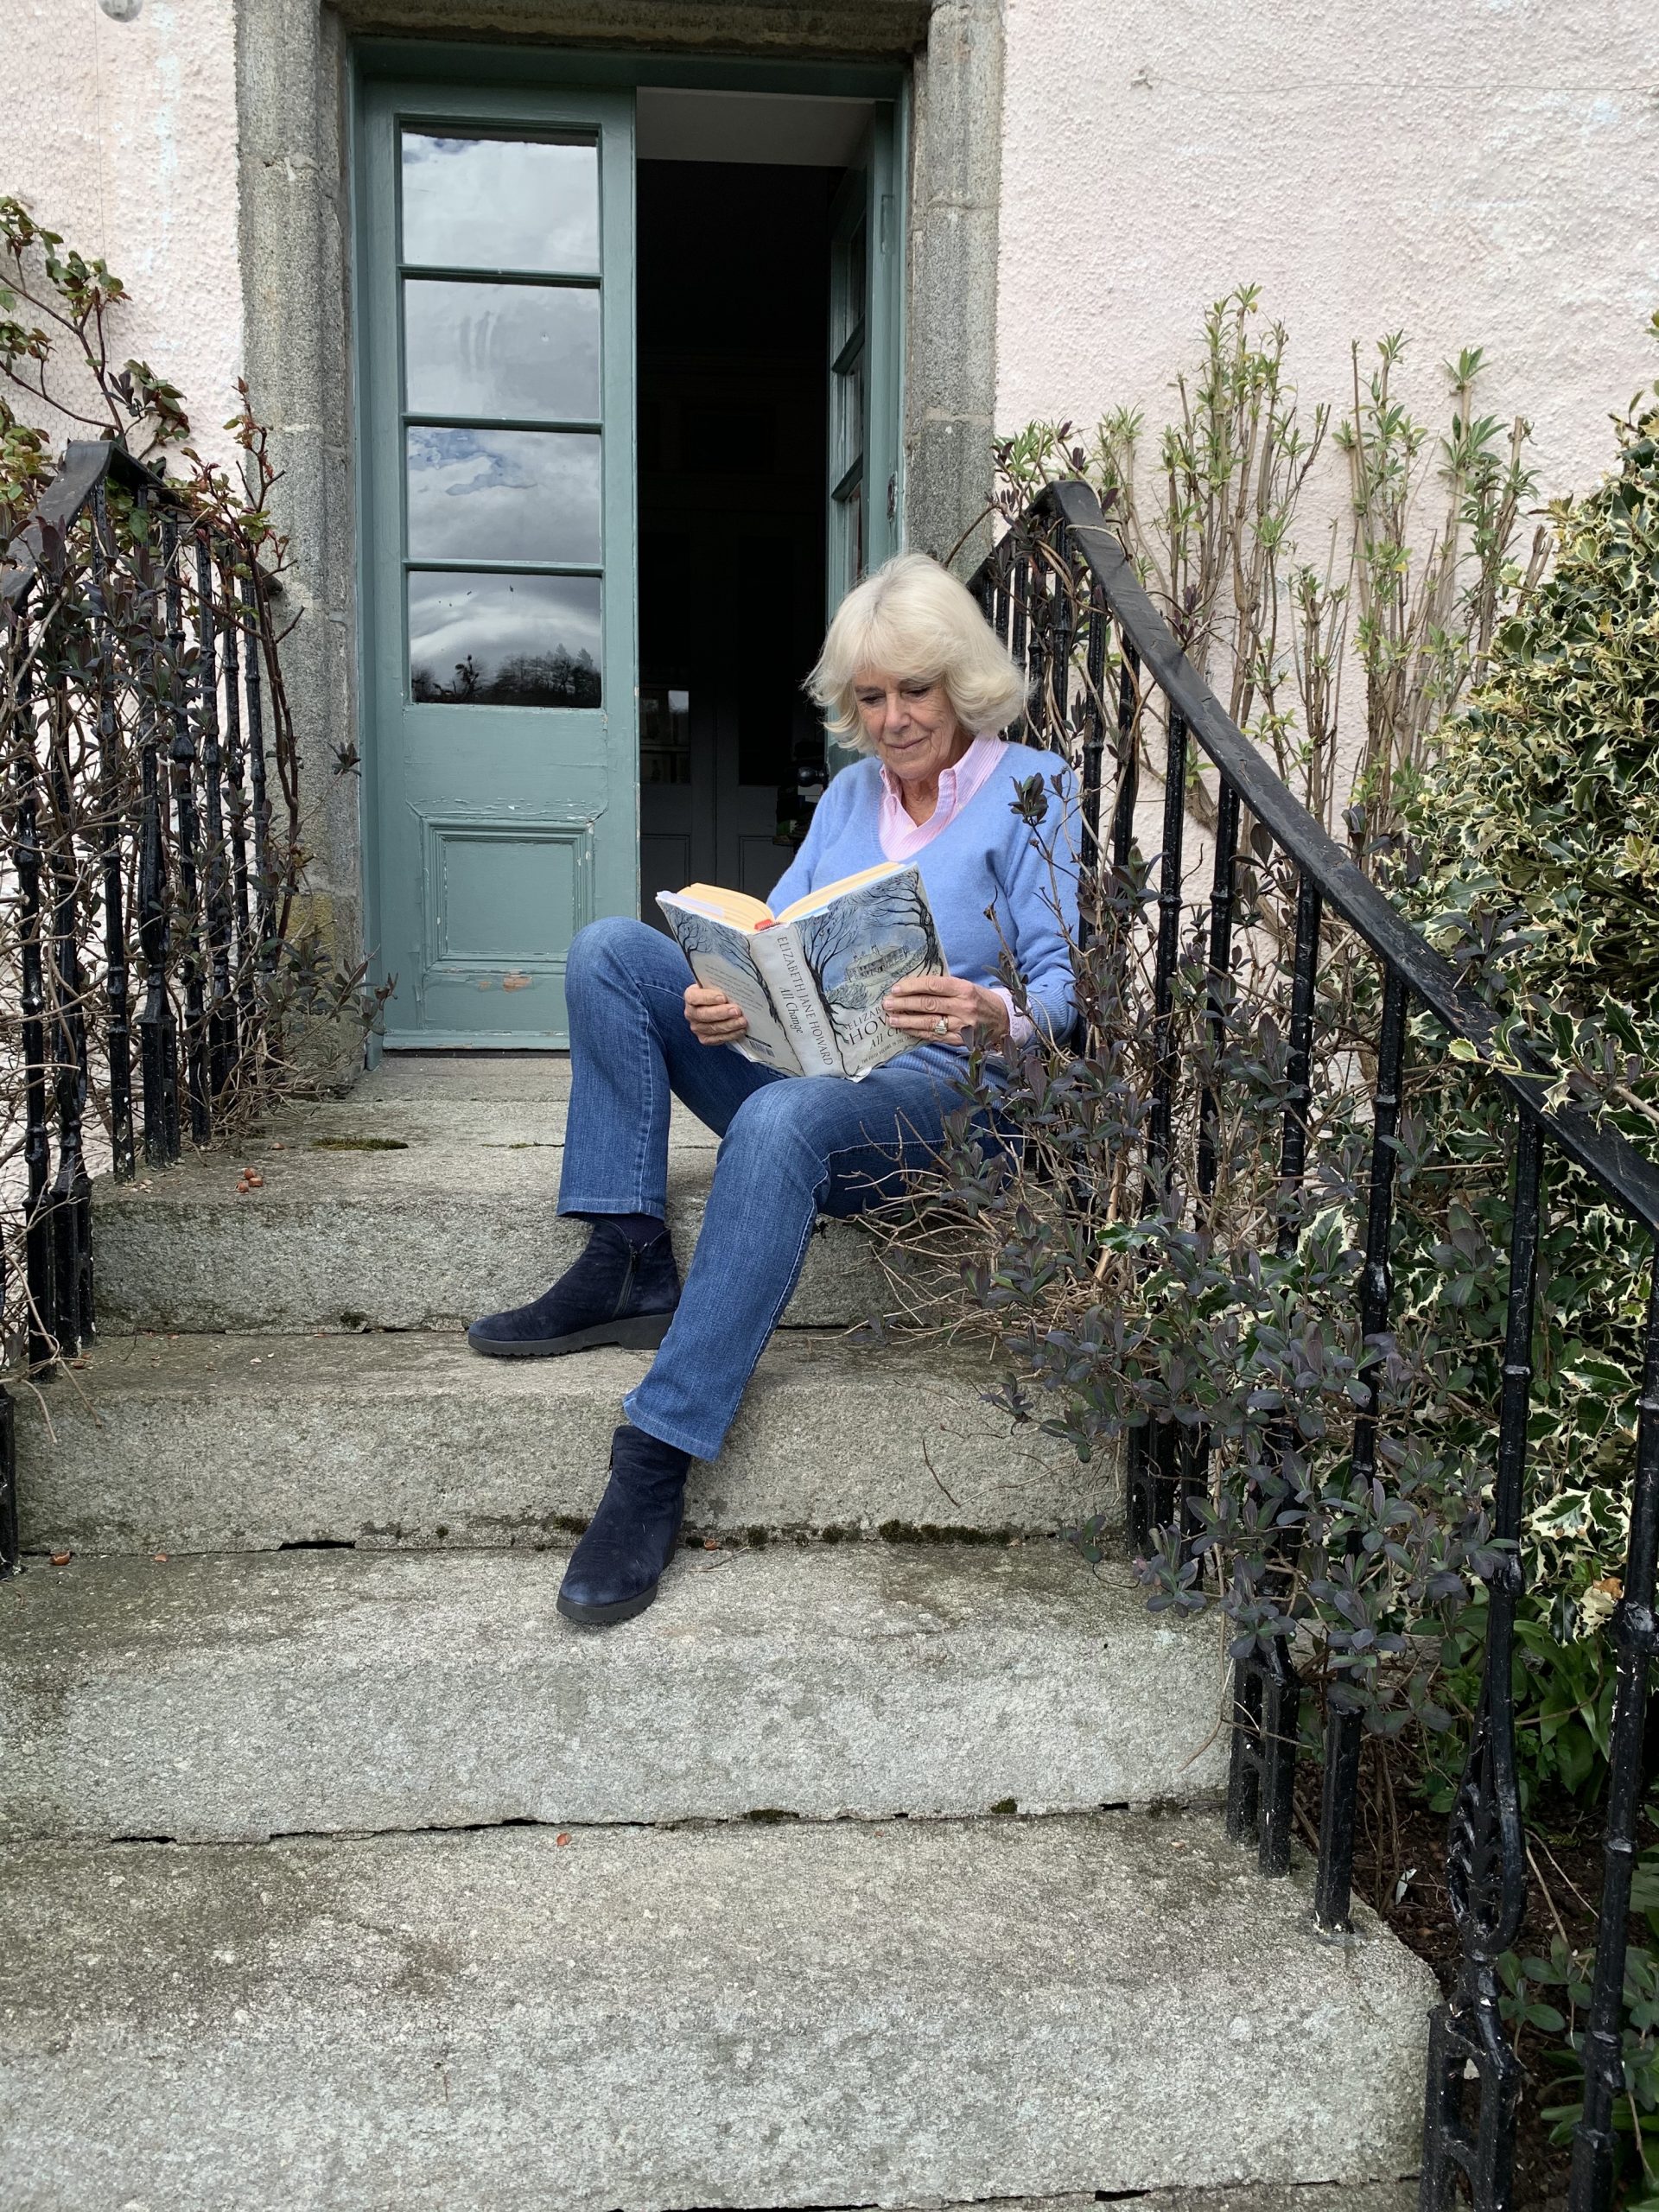 The Duchess of Cornwall reads 'All Change' - part of The Cazalet Chronicles - on a step at Birkhall (Clarence House)